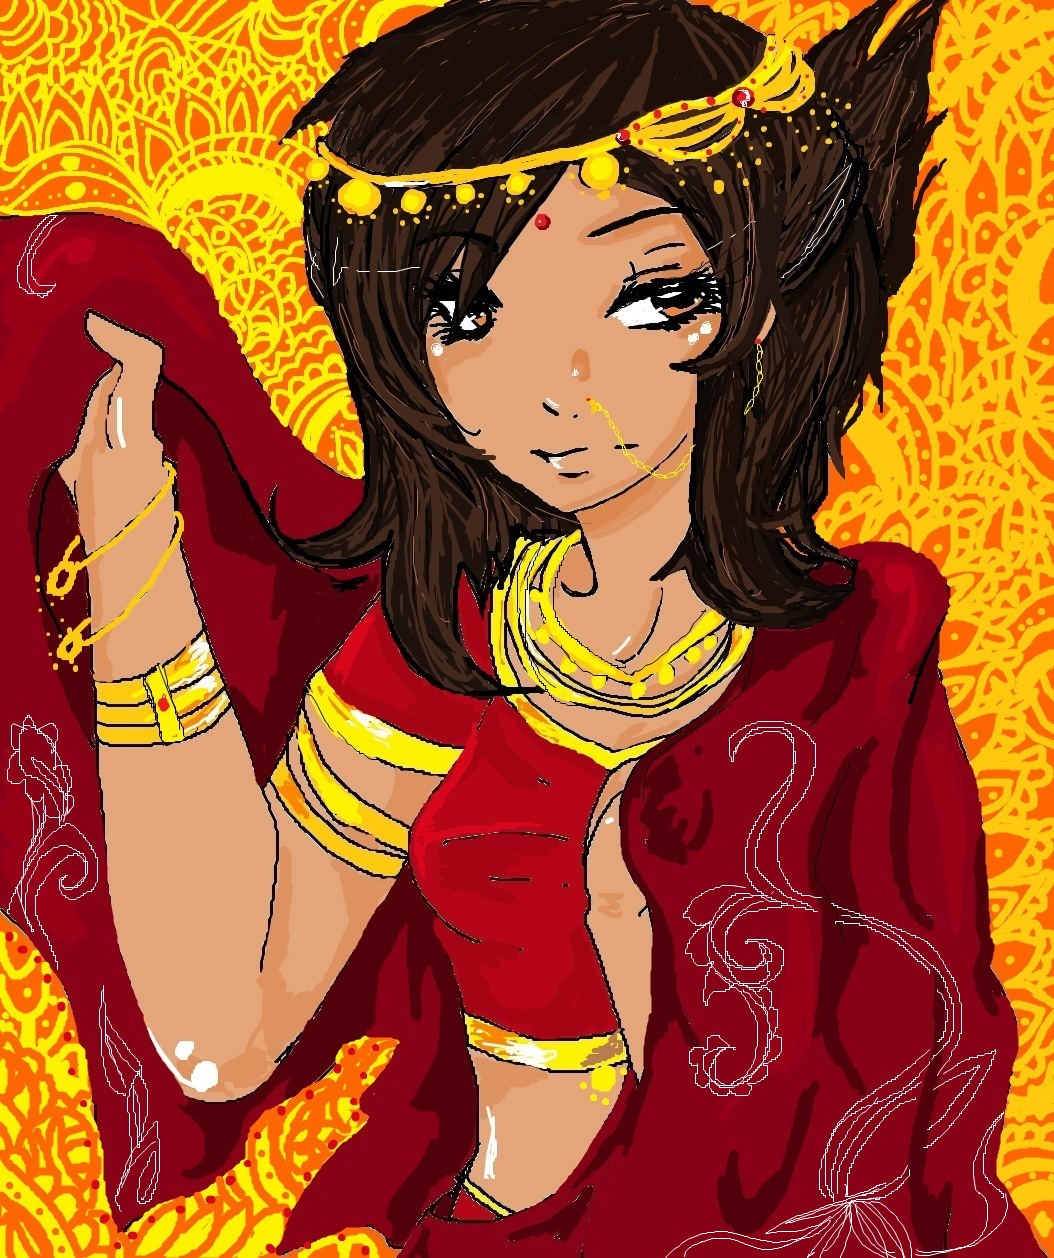 Girl from India by MadamePenguin